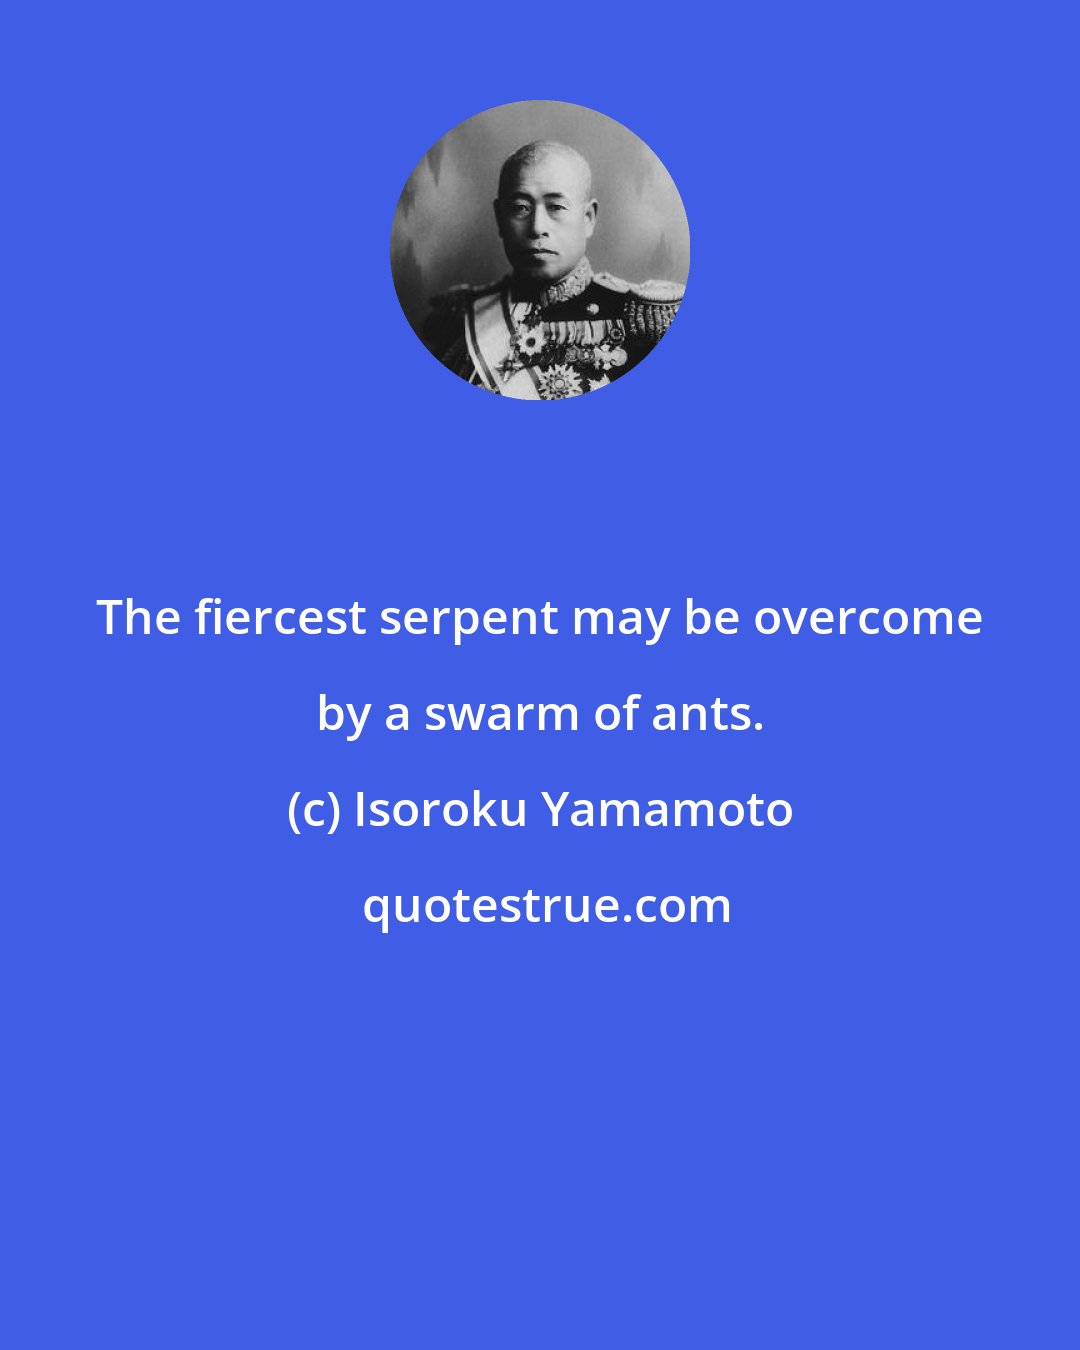 Isoroku Yamamoto: The fiercest serpent may be overcome by a swarm of ants.